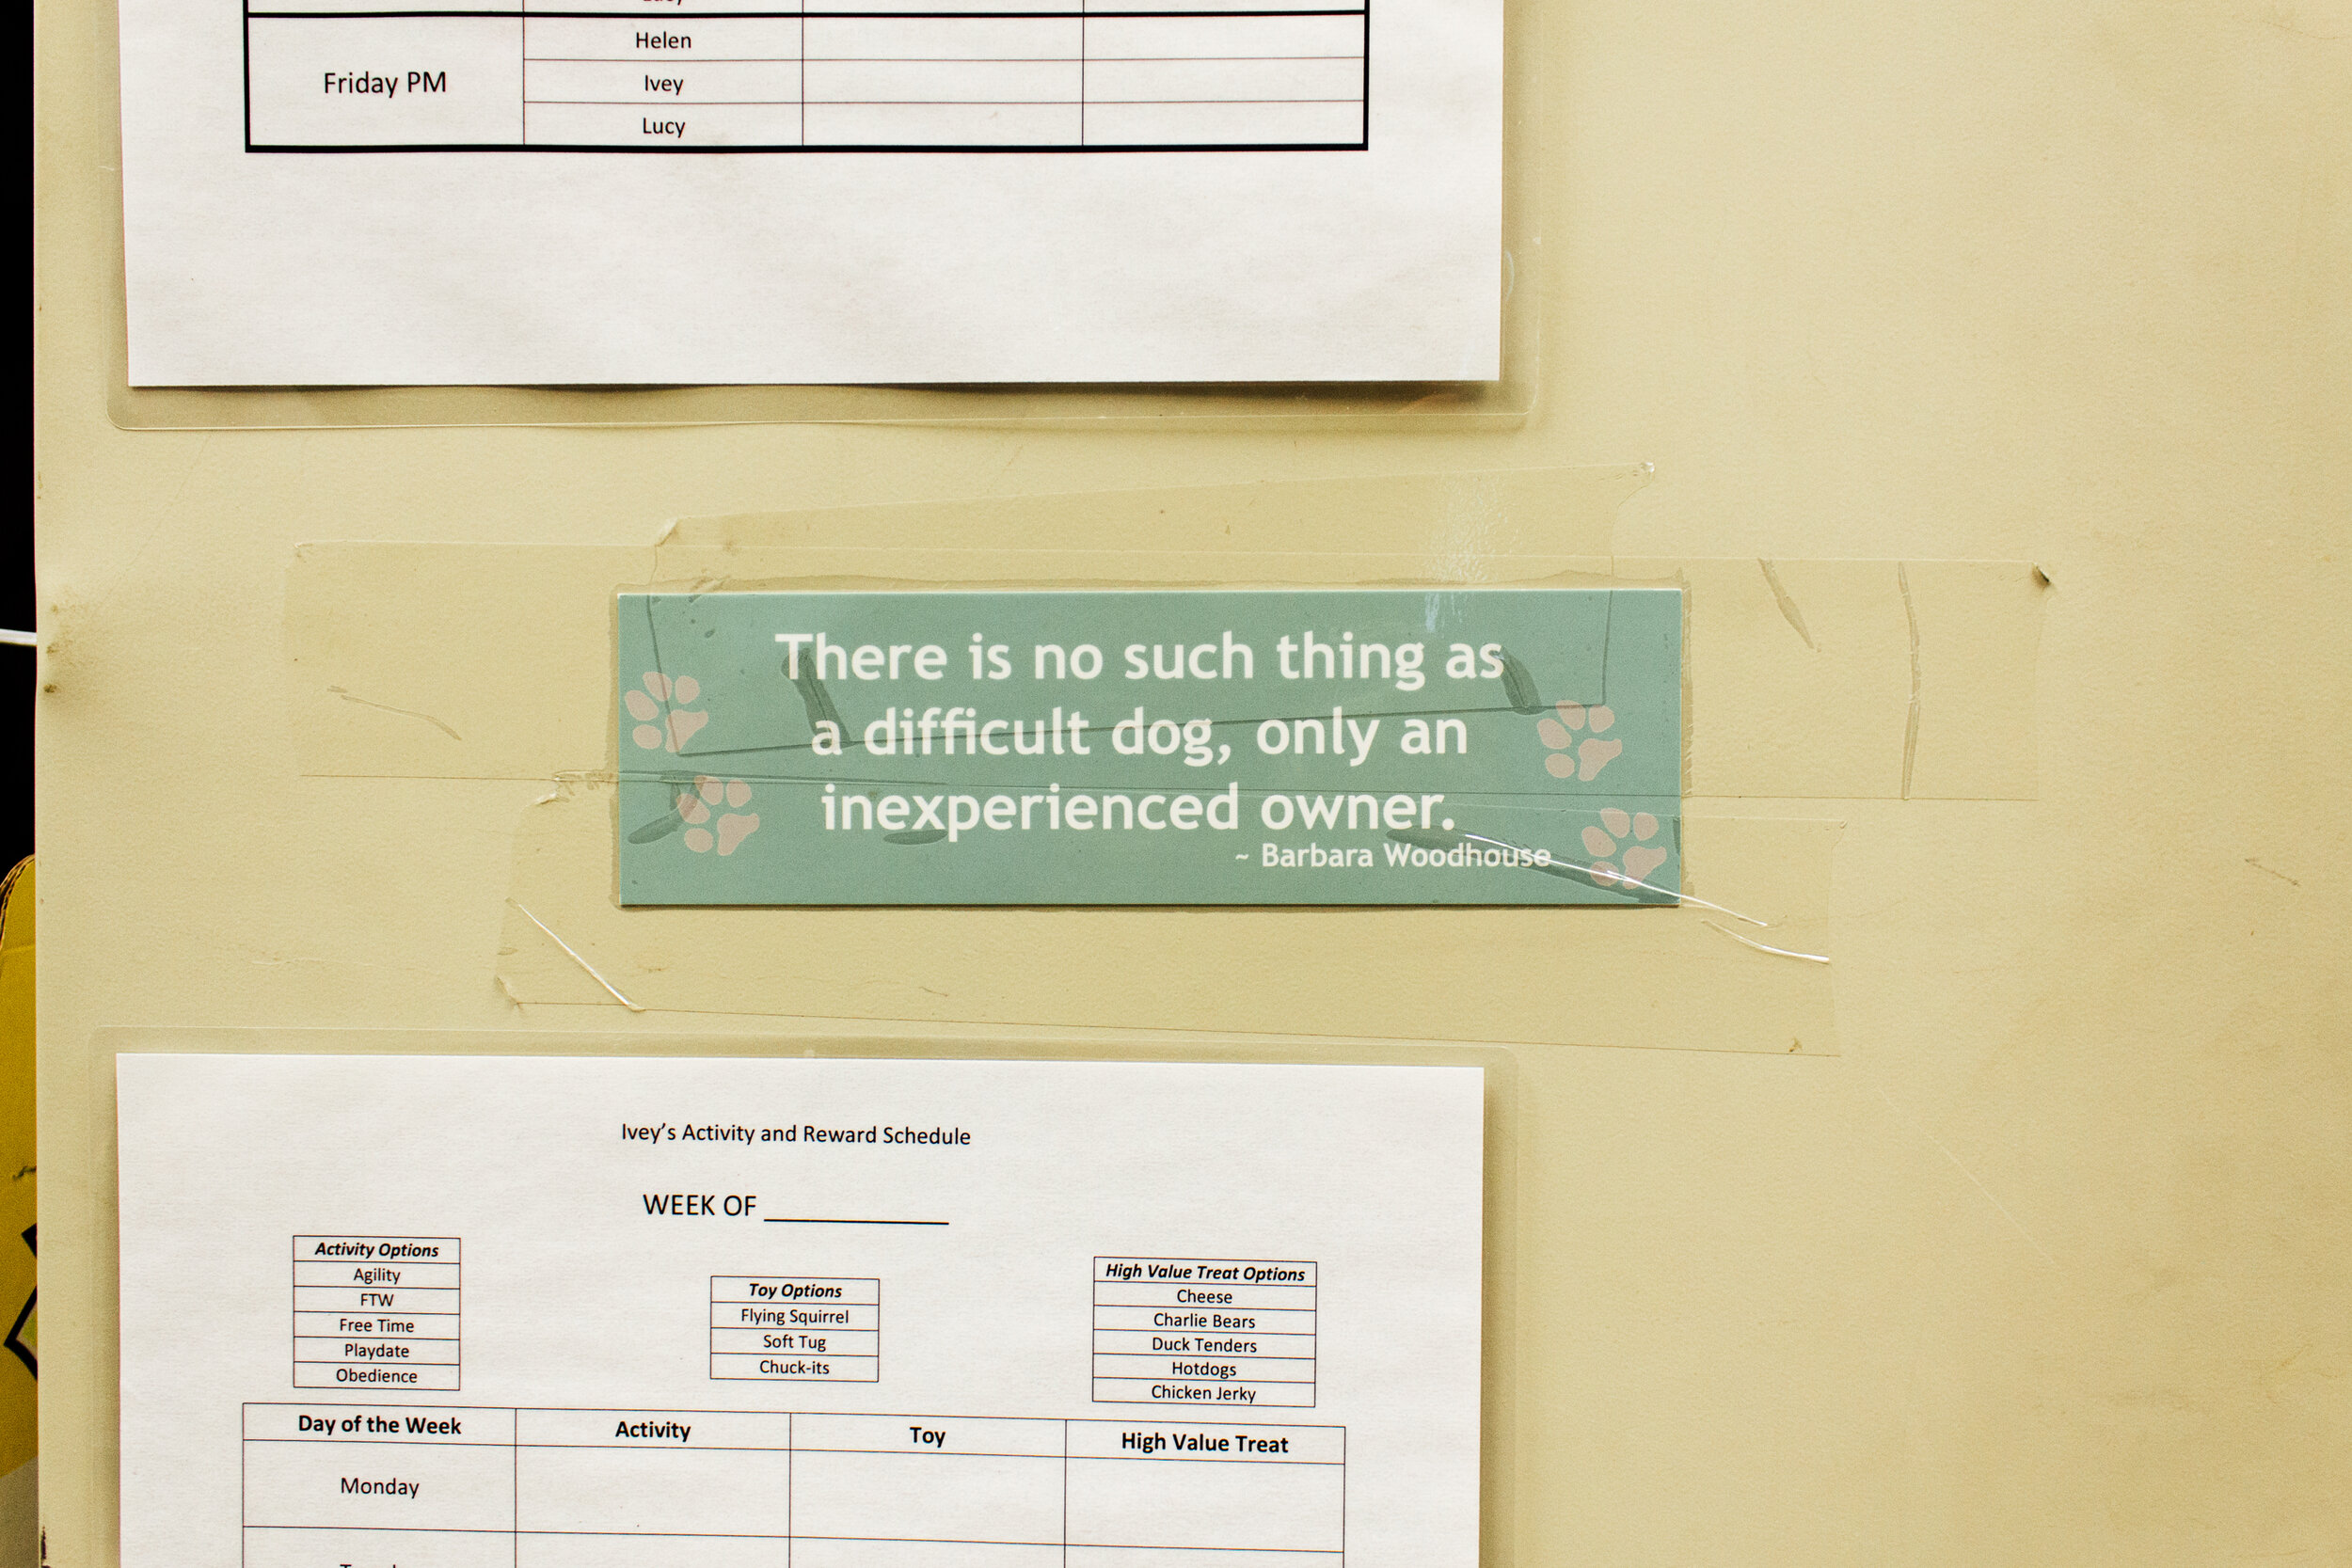 A sign on the wall that reads "There is no such thing as a difficult dog, only an inexperienced owner."